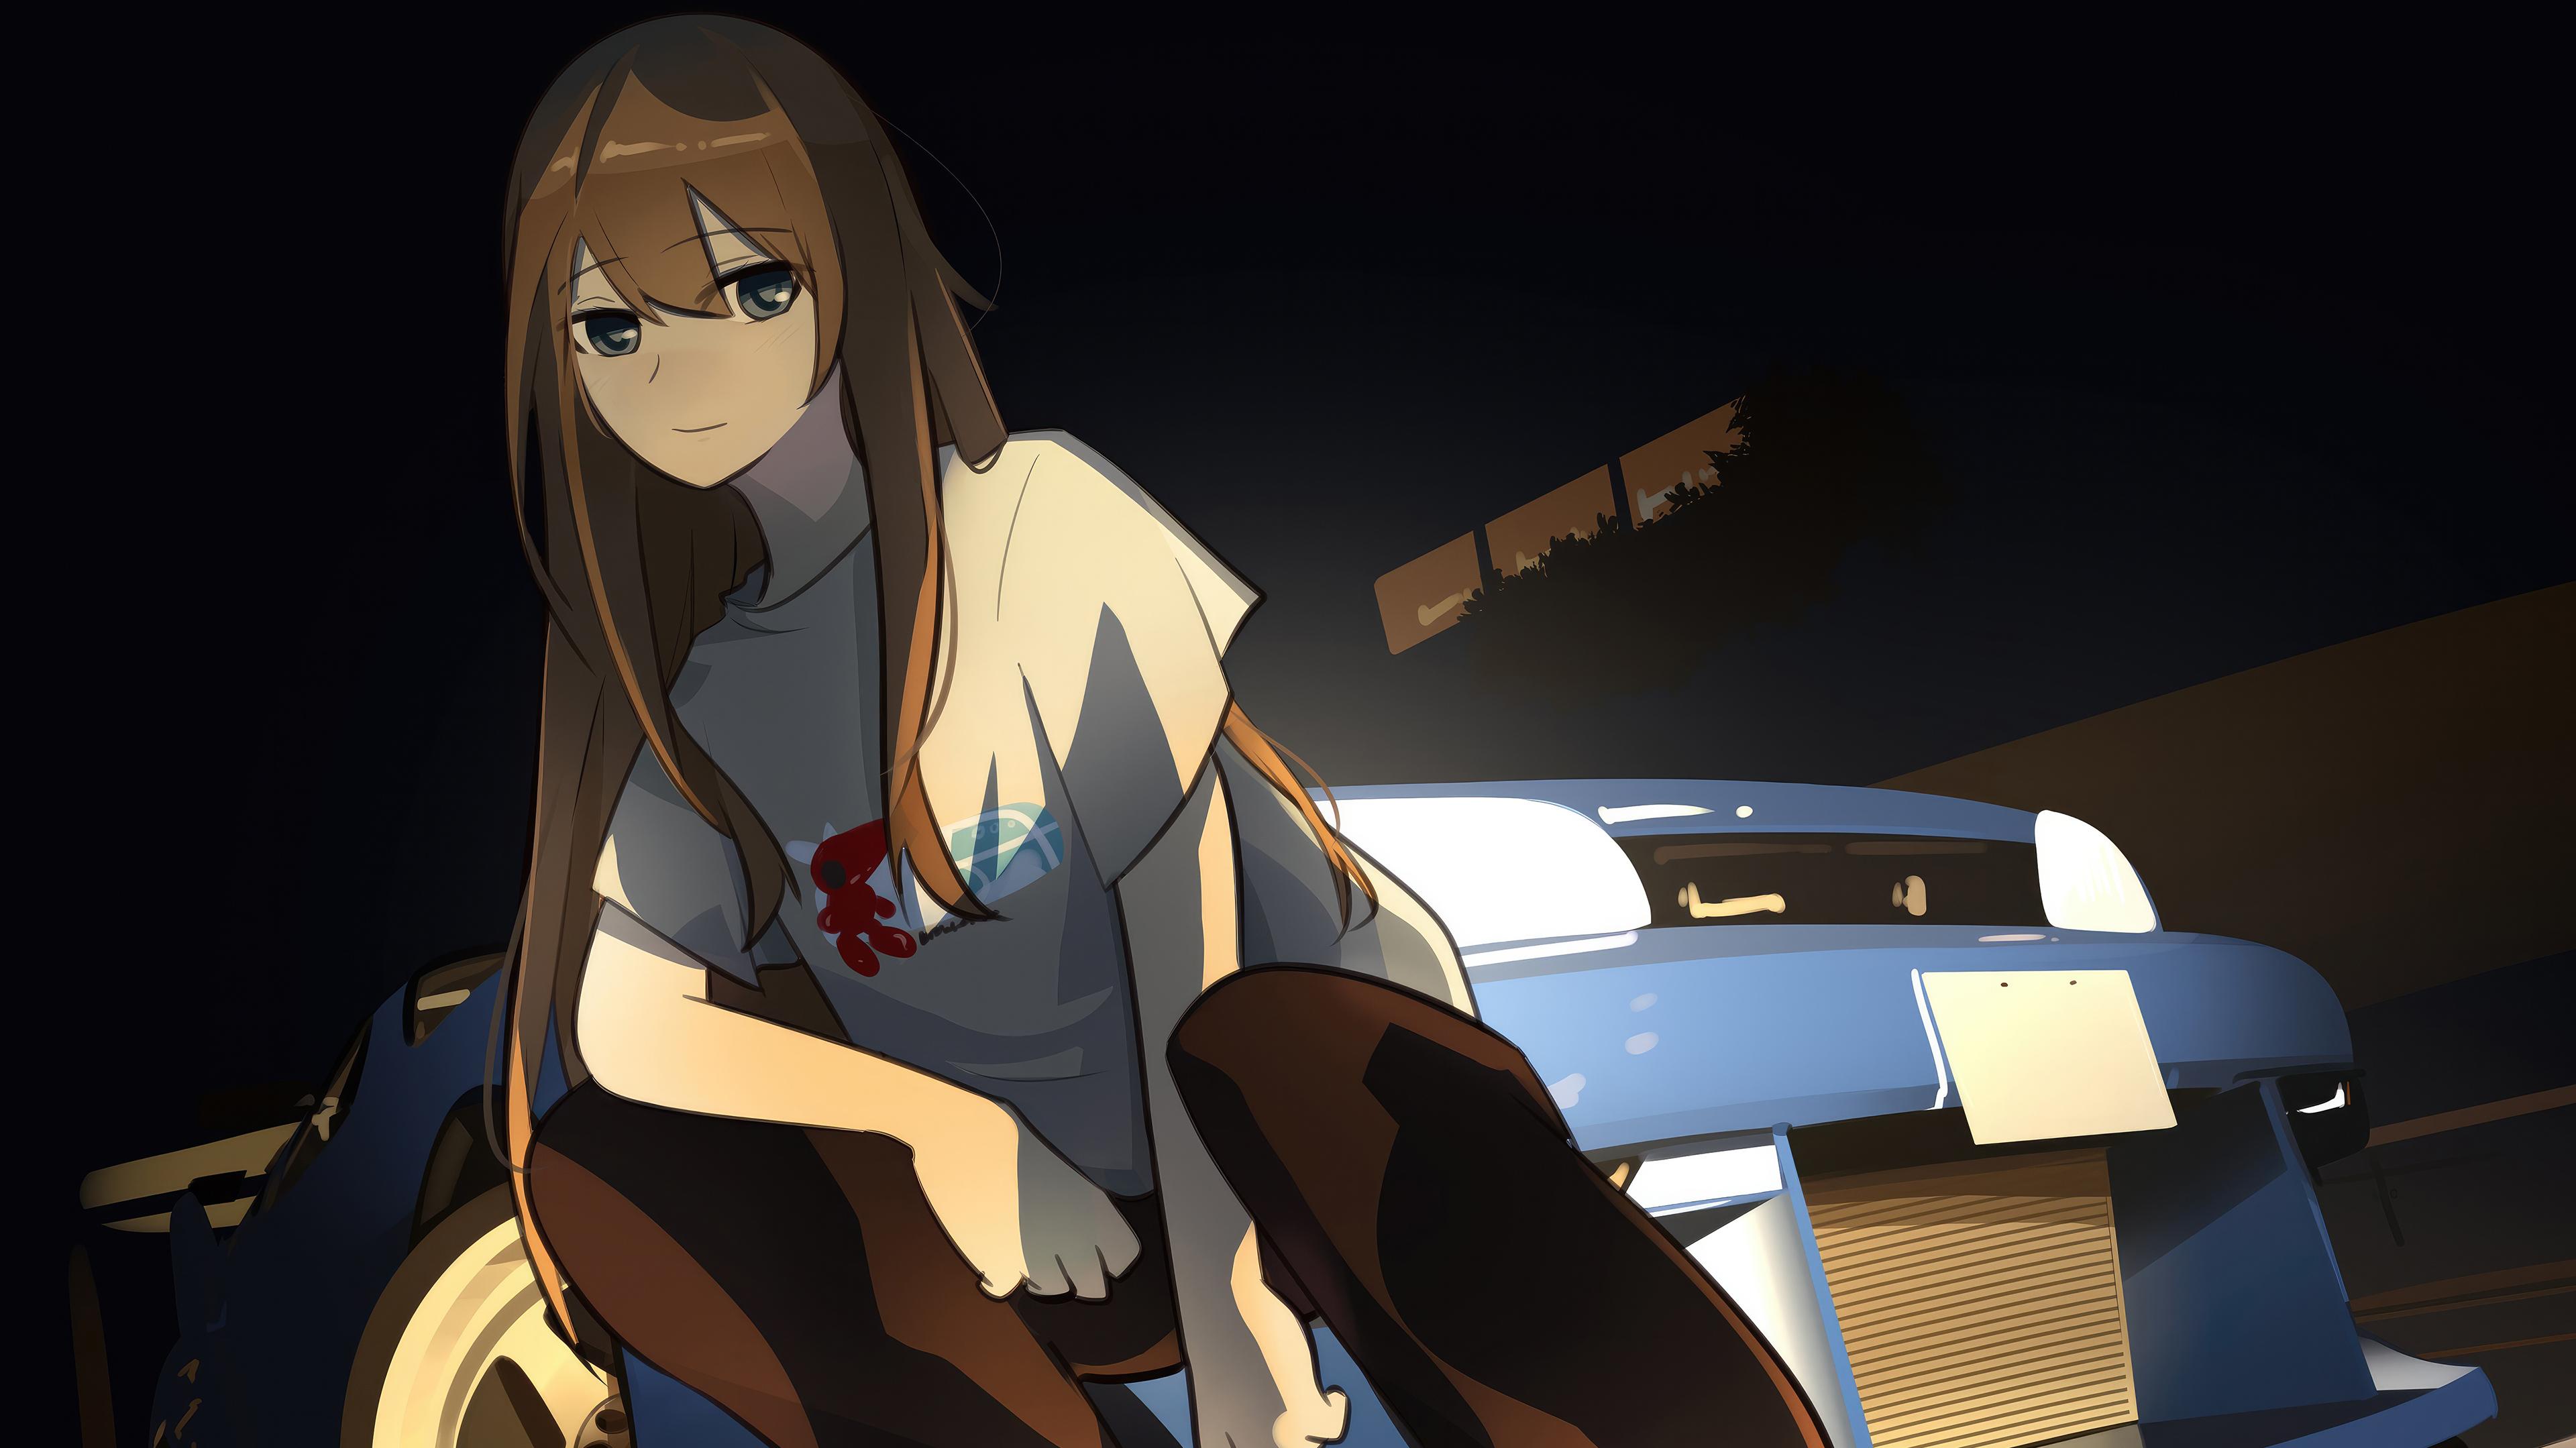 Anime Girl With Cars HD Anime 4k Wallpapers Images Backgrounds